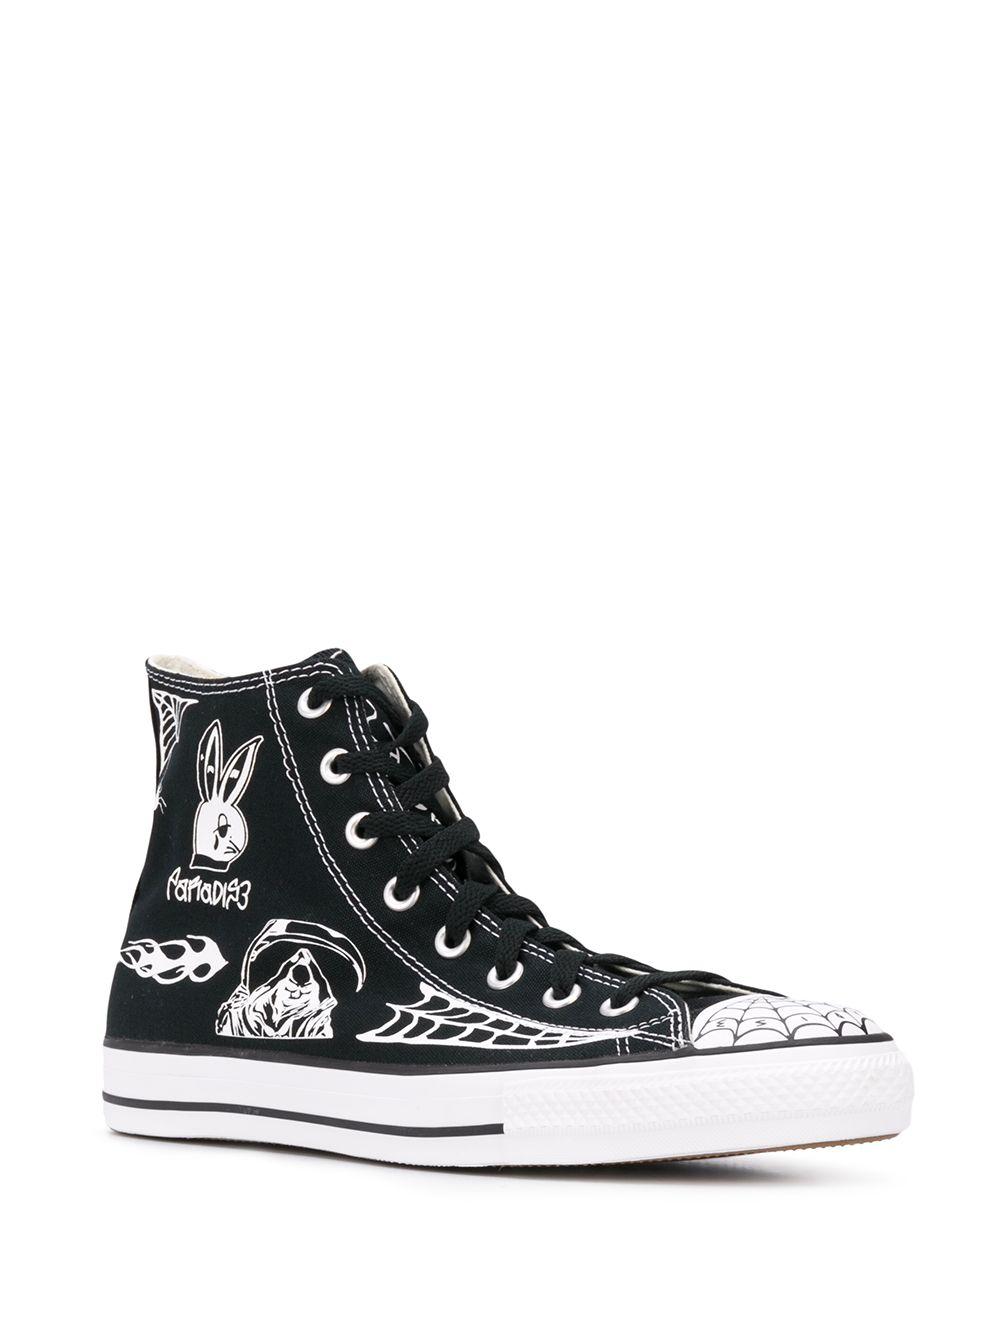 Converse Spiderweb Print Chuck Taylor Sneakers in Black for Men | Lyst